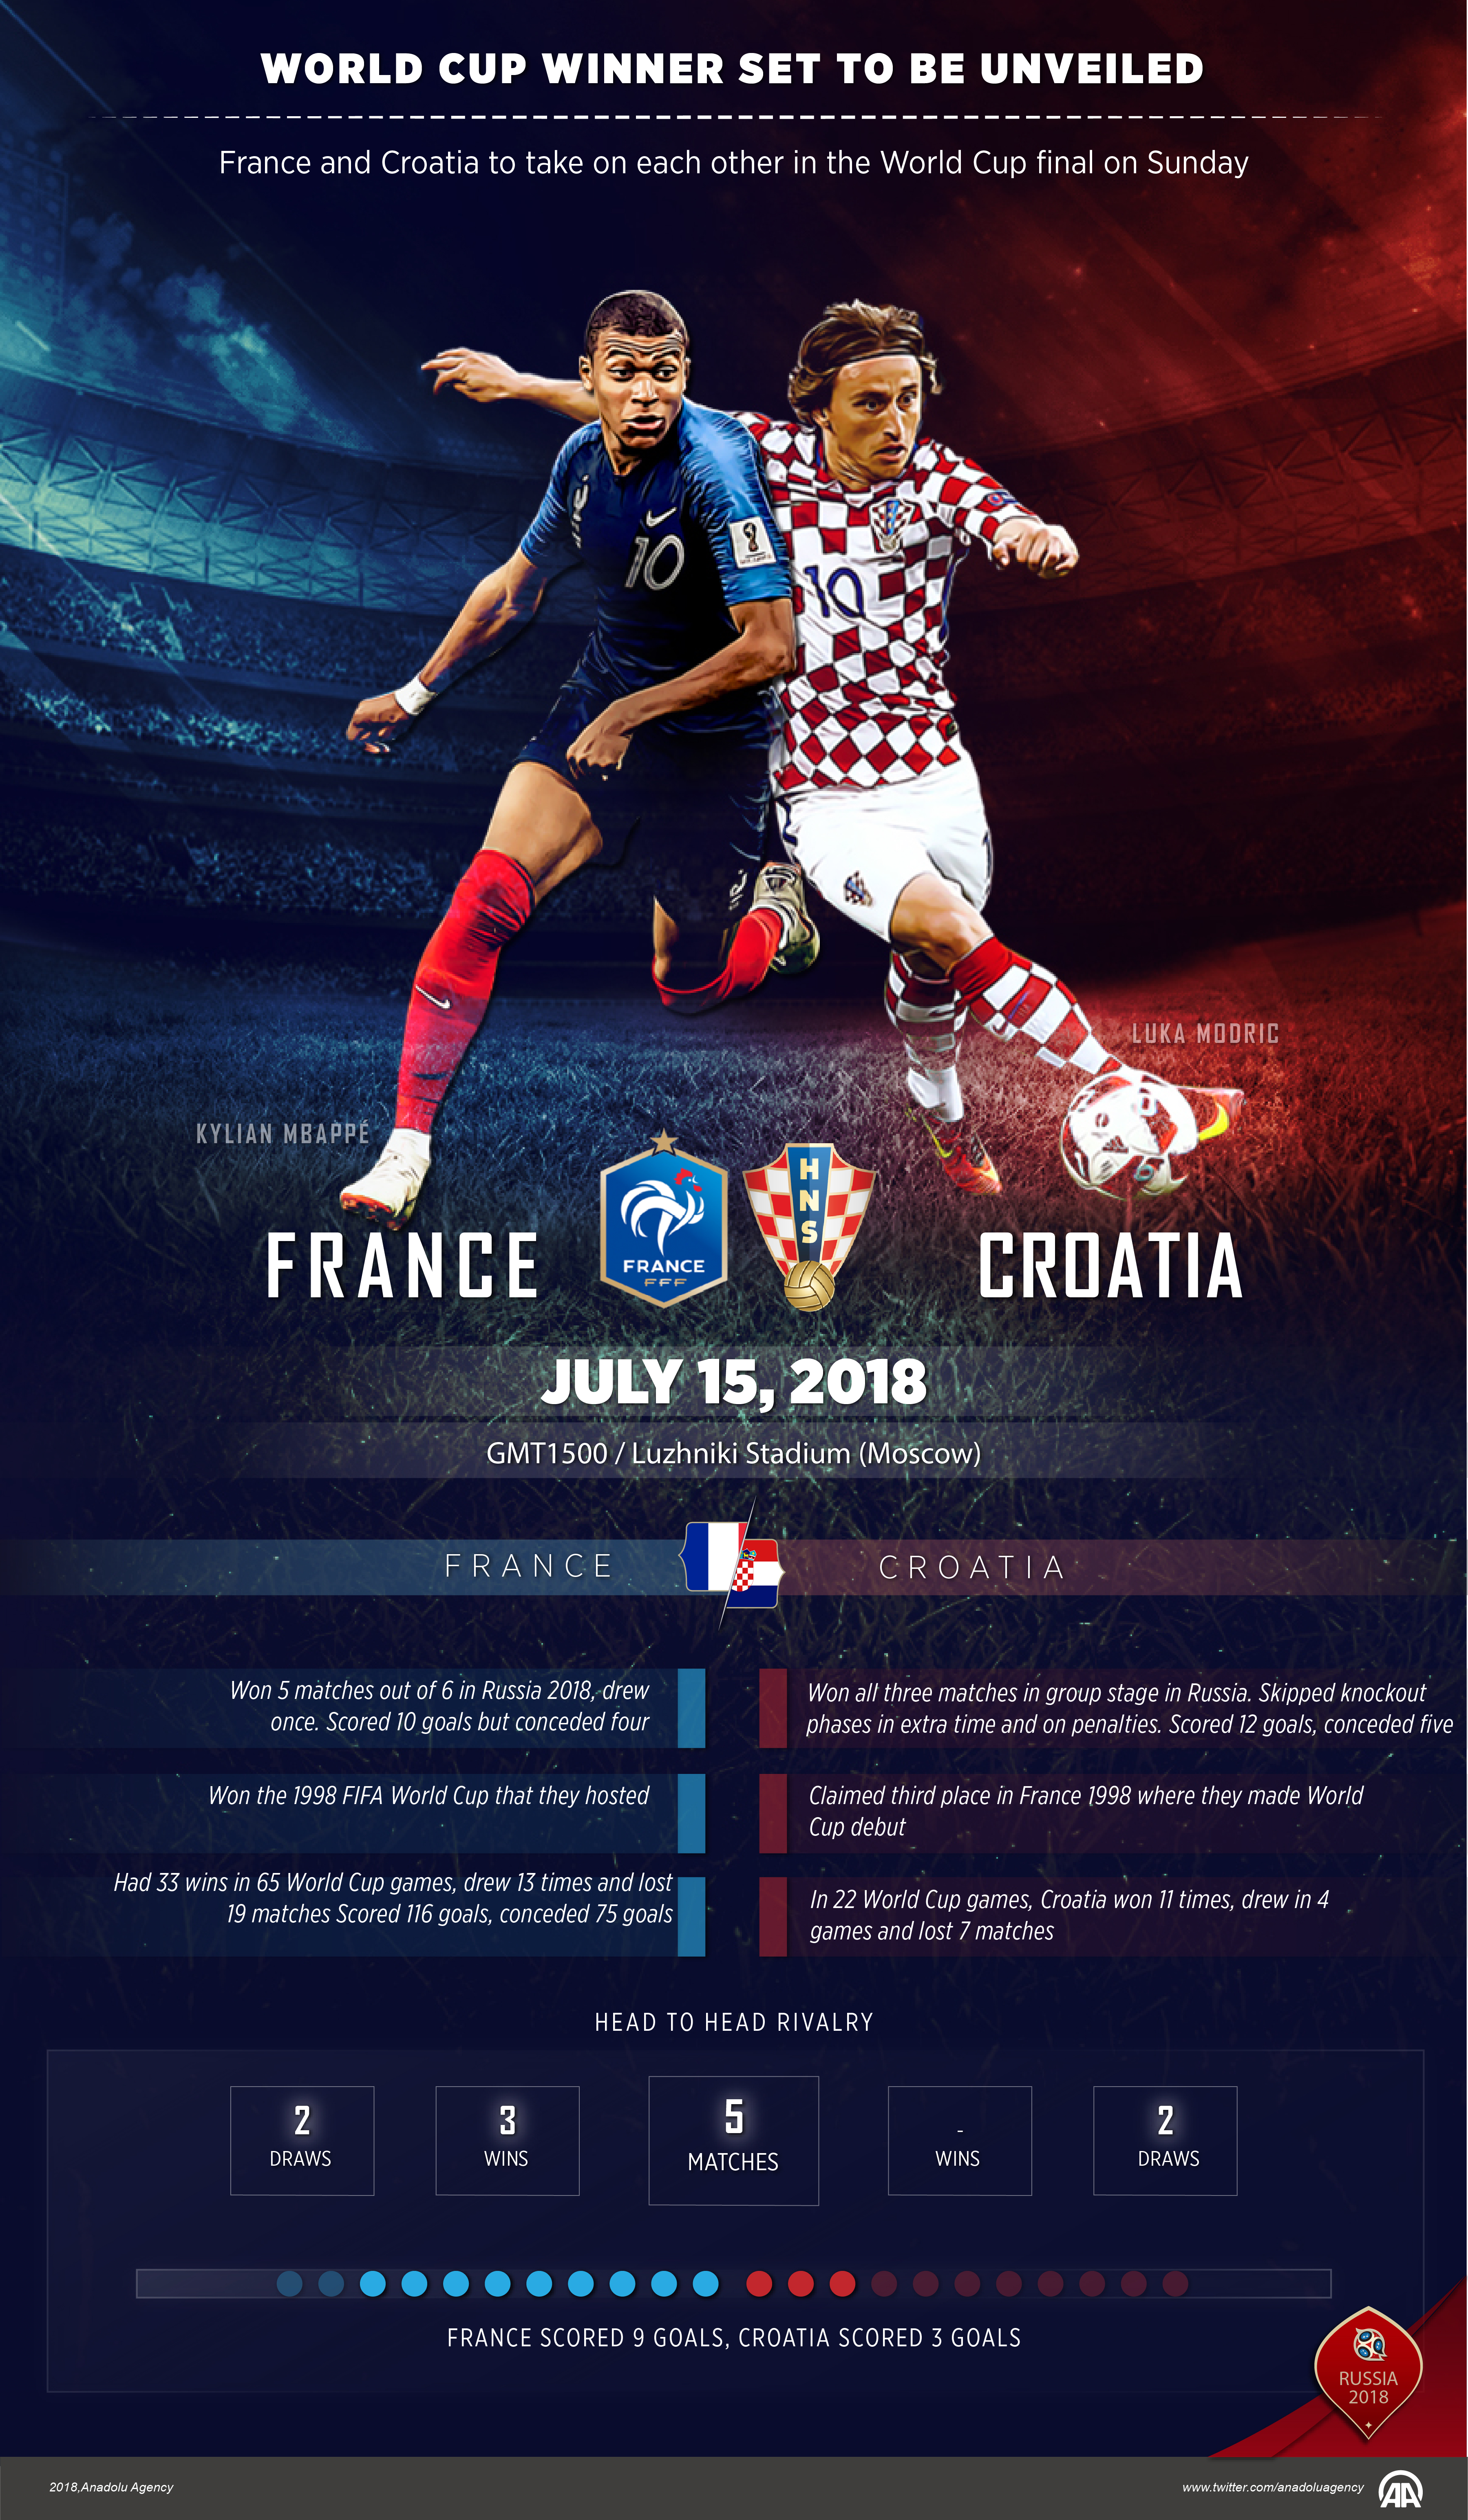 What to watch for in Sunday's World Cup final between France and Croatia